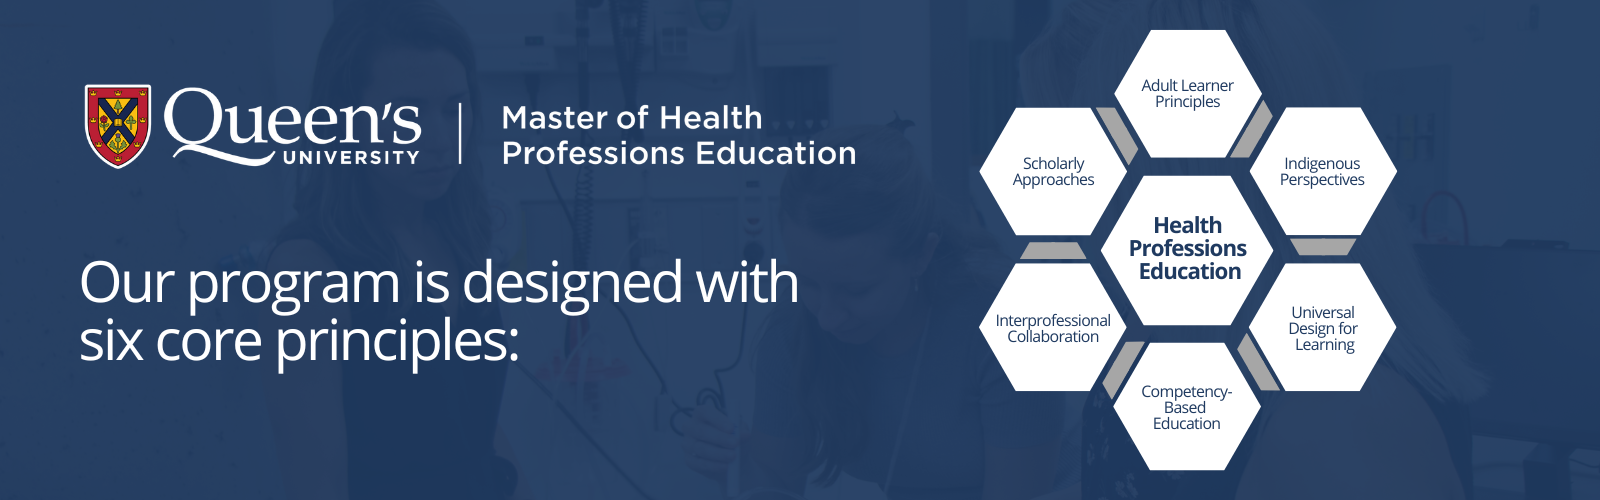 Master of Health Professions Education. Our Program is Designed with six core principles: Adult Learner Principles; Indigenous Perspectives; Universal Design for Learning; Competency-Based Education; Interprofessional Collaboration; Scholarly Approaches